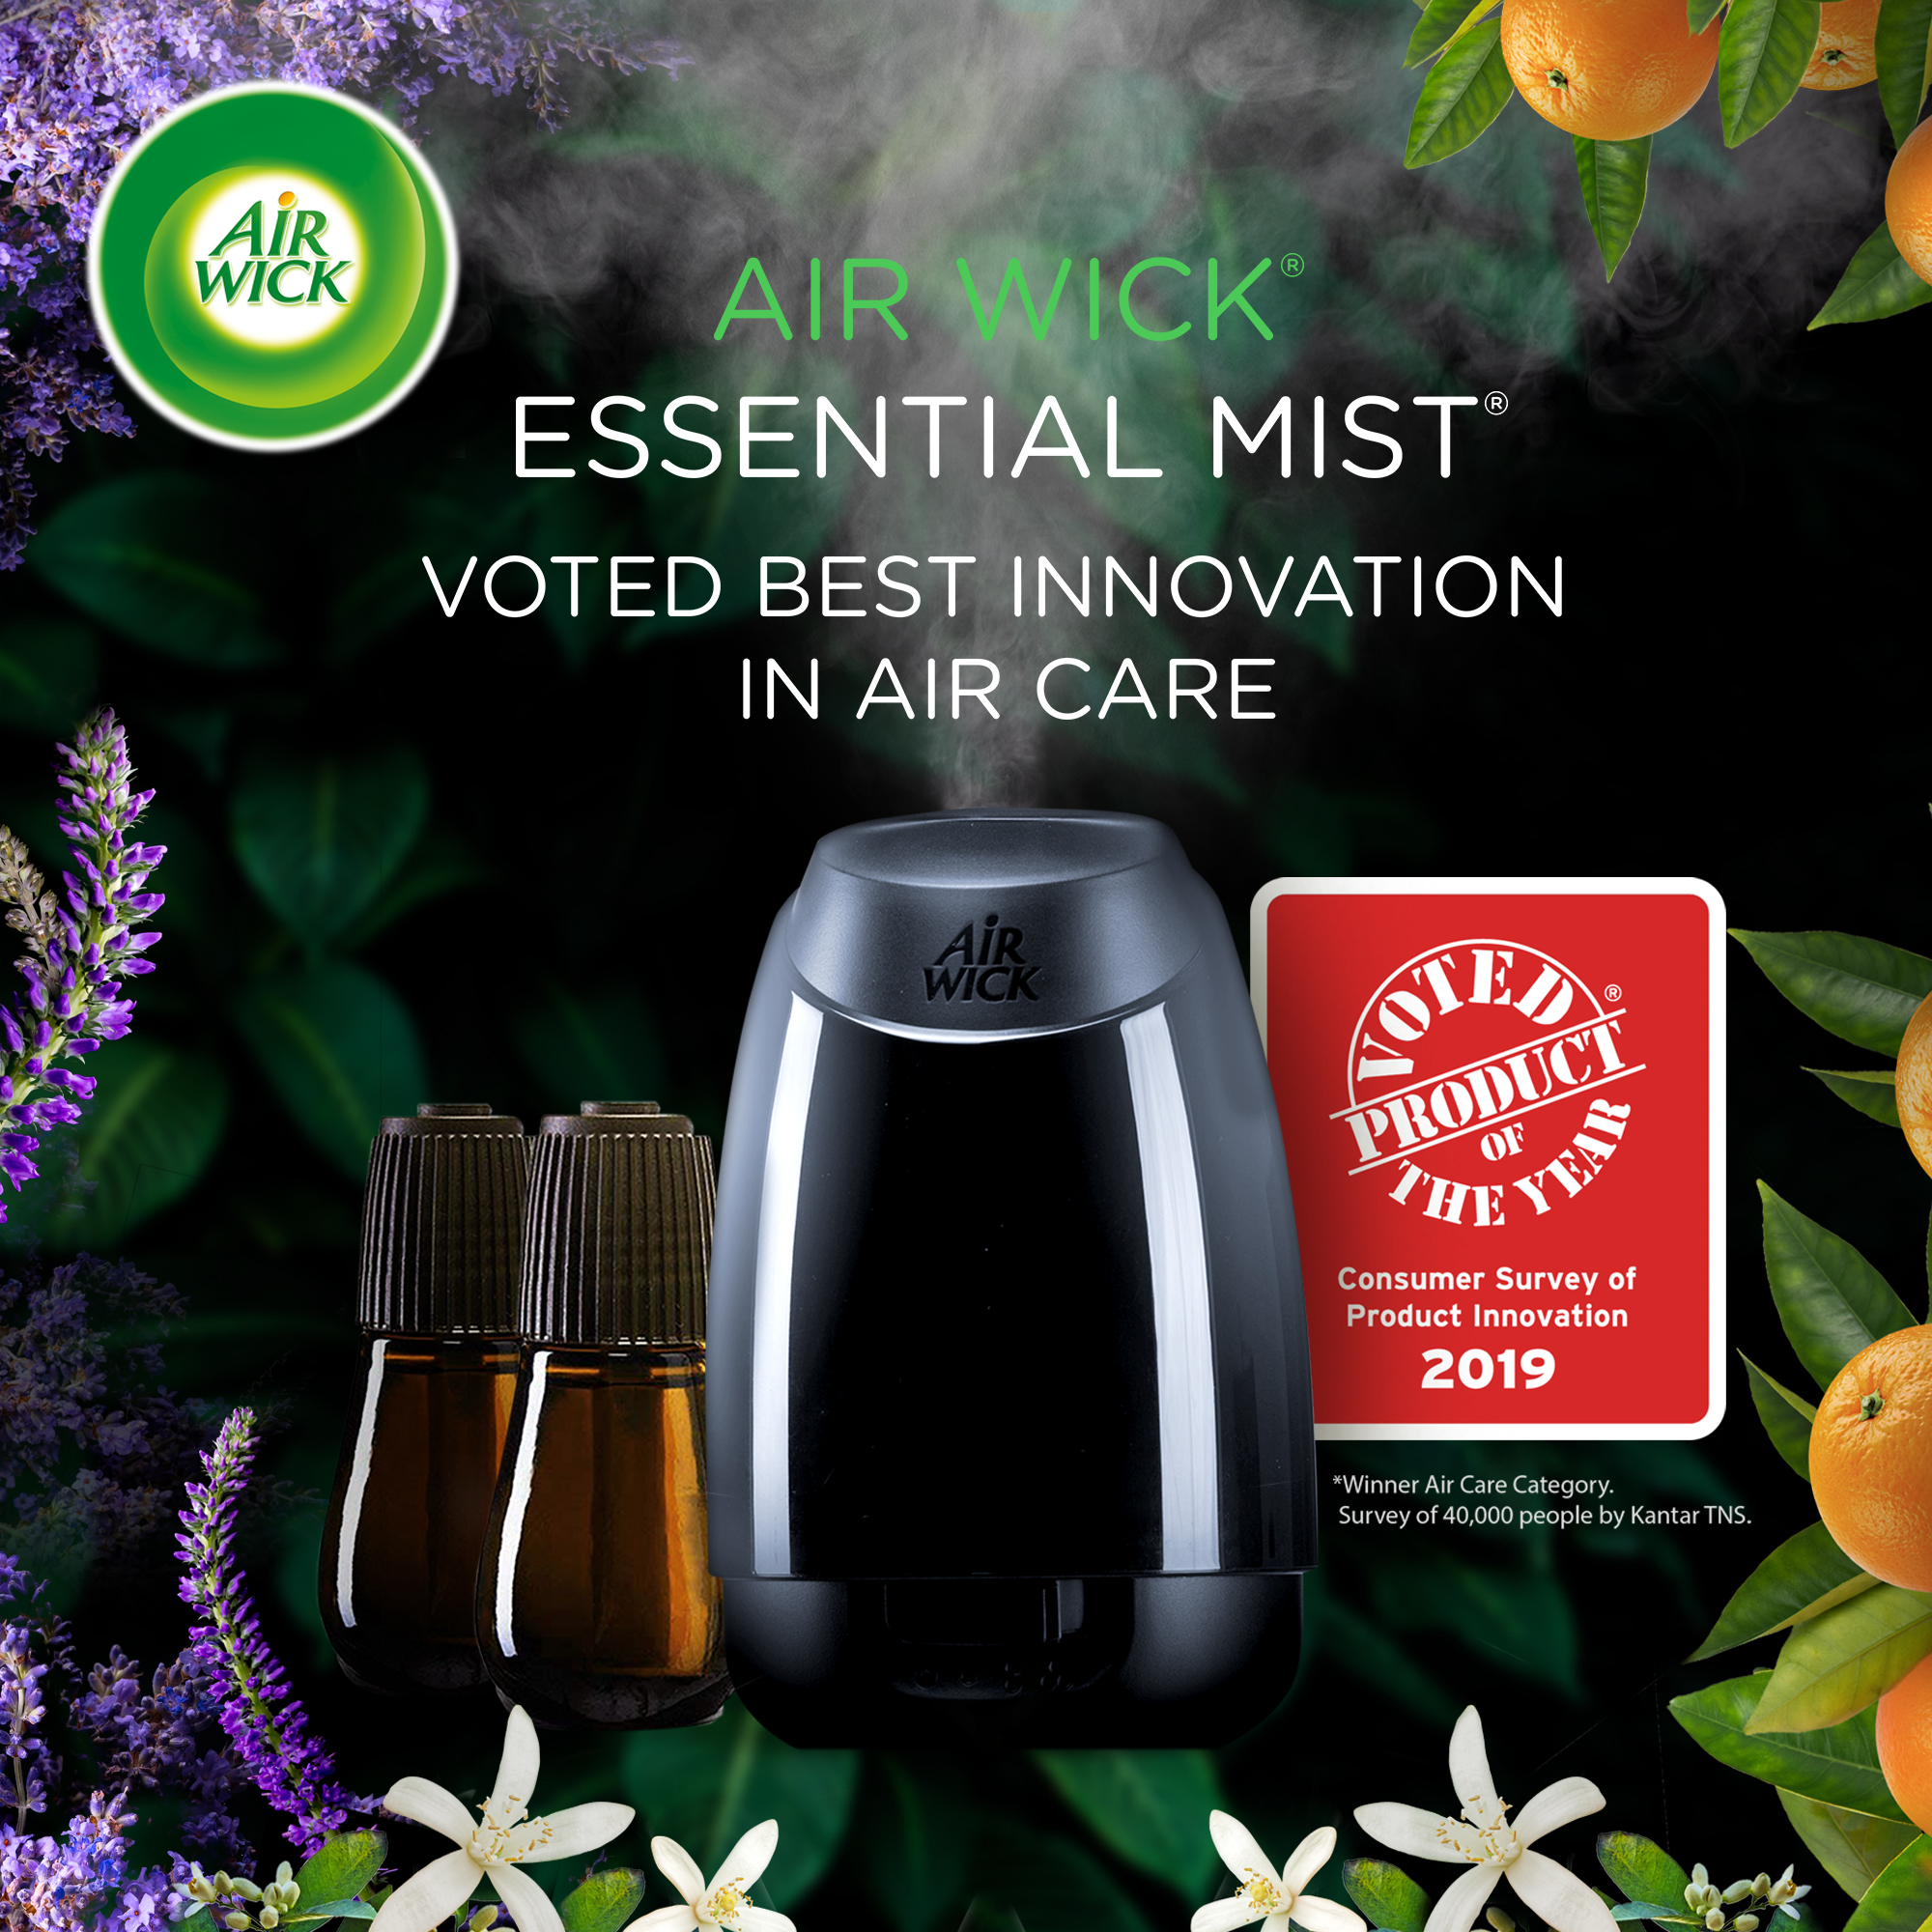 Air Wick Essential Mist Starter Kit (Diffuser + Refill), Coconut and